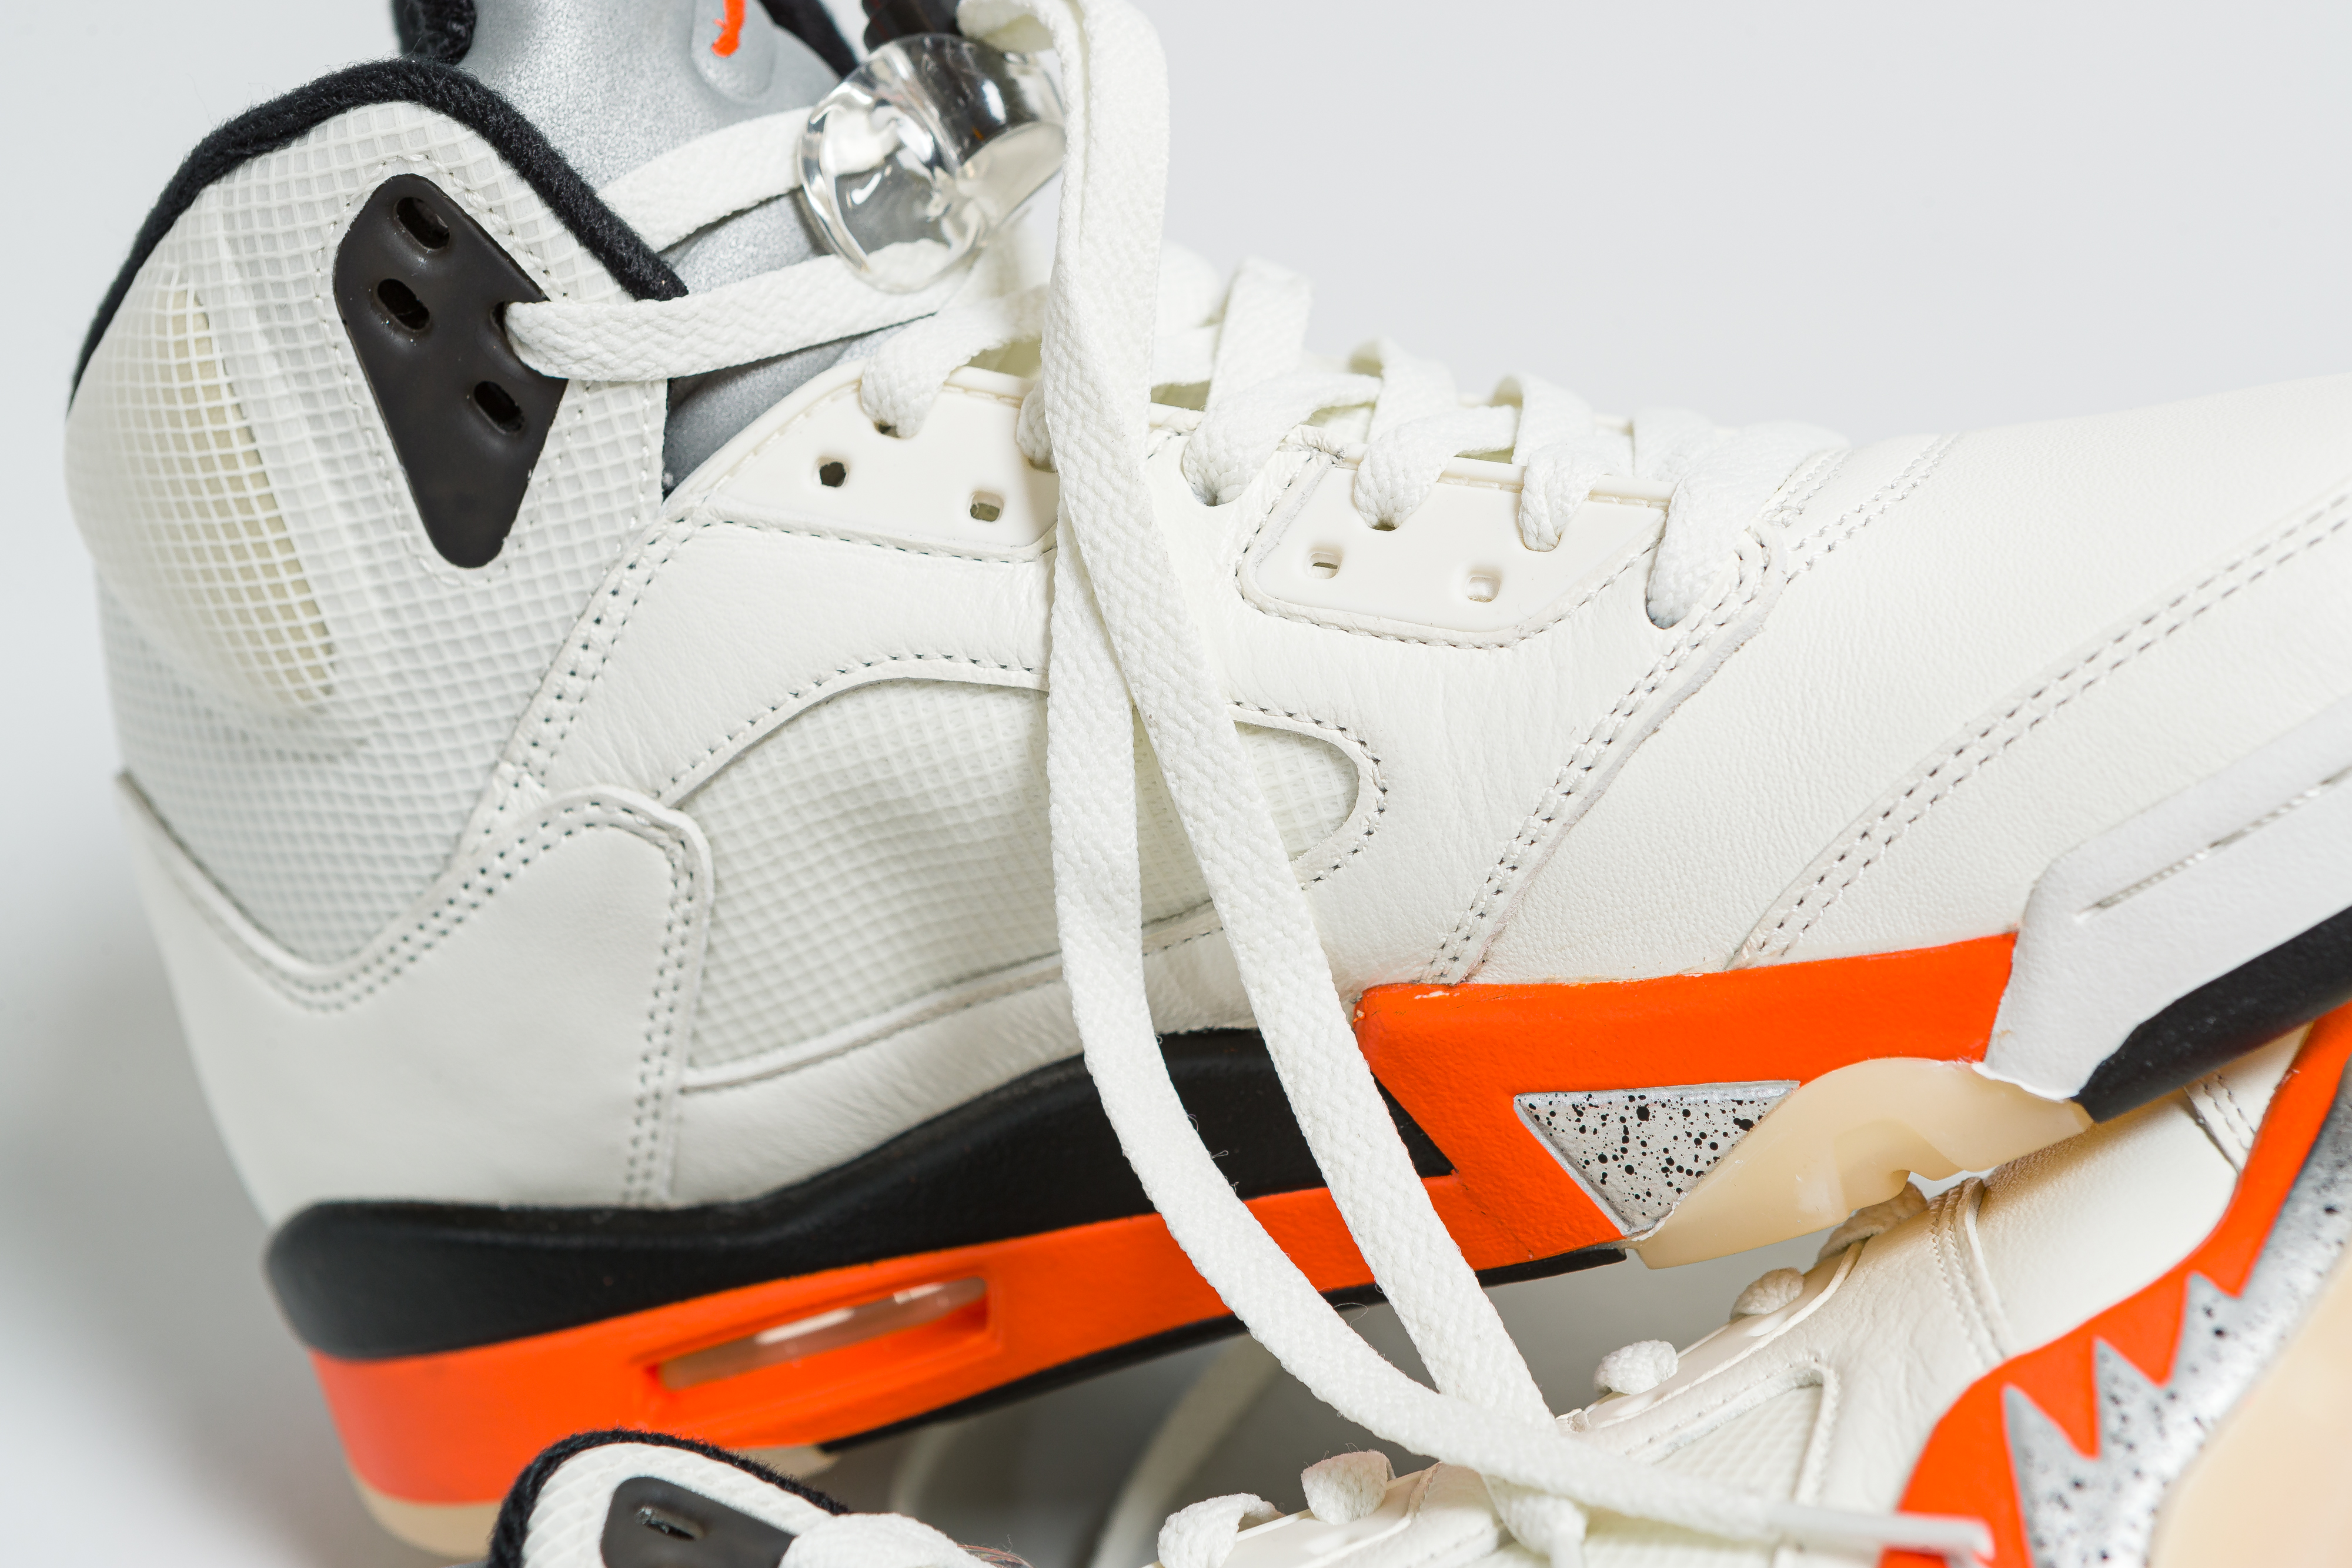 Up There Launches - Nike Air Jordan 5 Retro ‘Shattered Backboard'